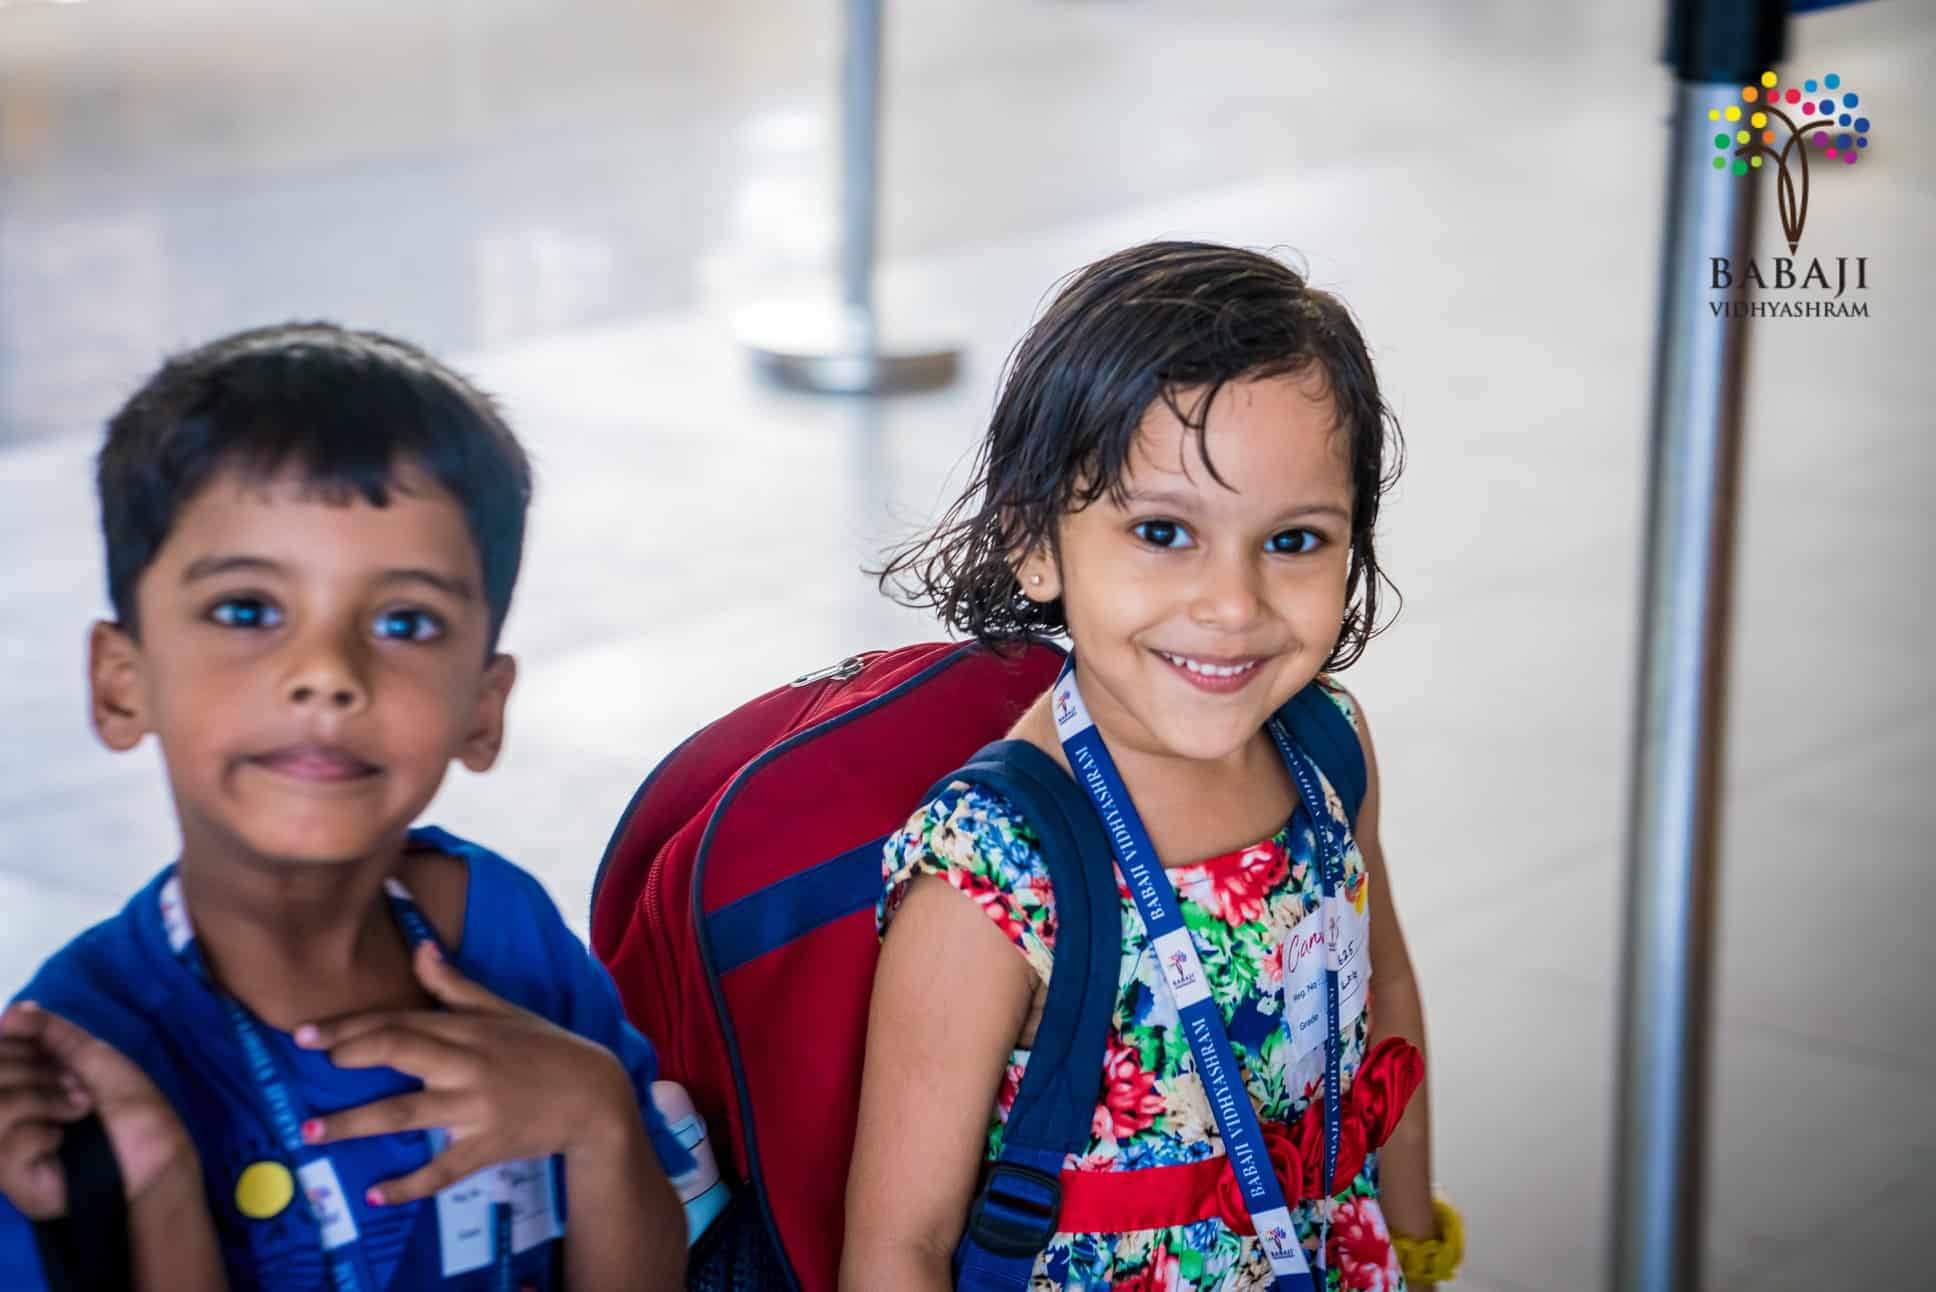 Two primary section children of Babaji vidyashram with their school bags with the girl child in colourful frock and the boy child in a blue T Shirt  smiling at the camera.